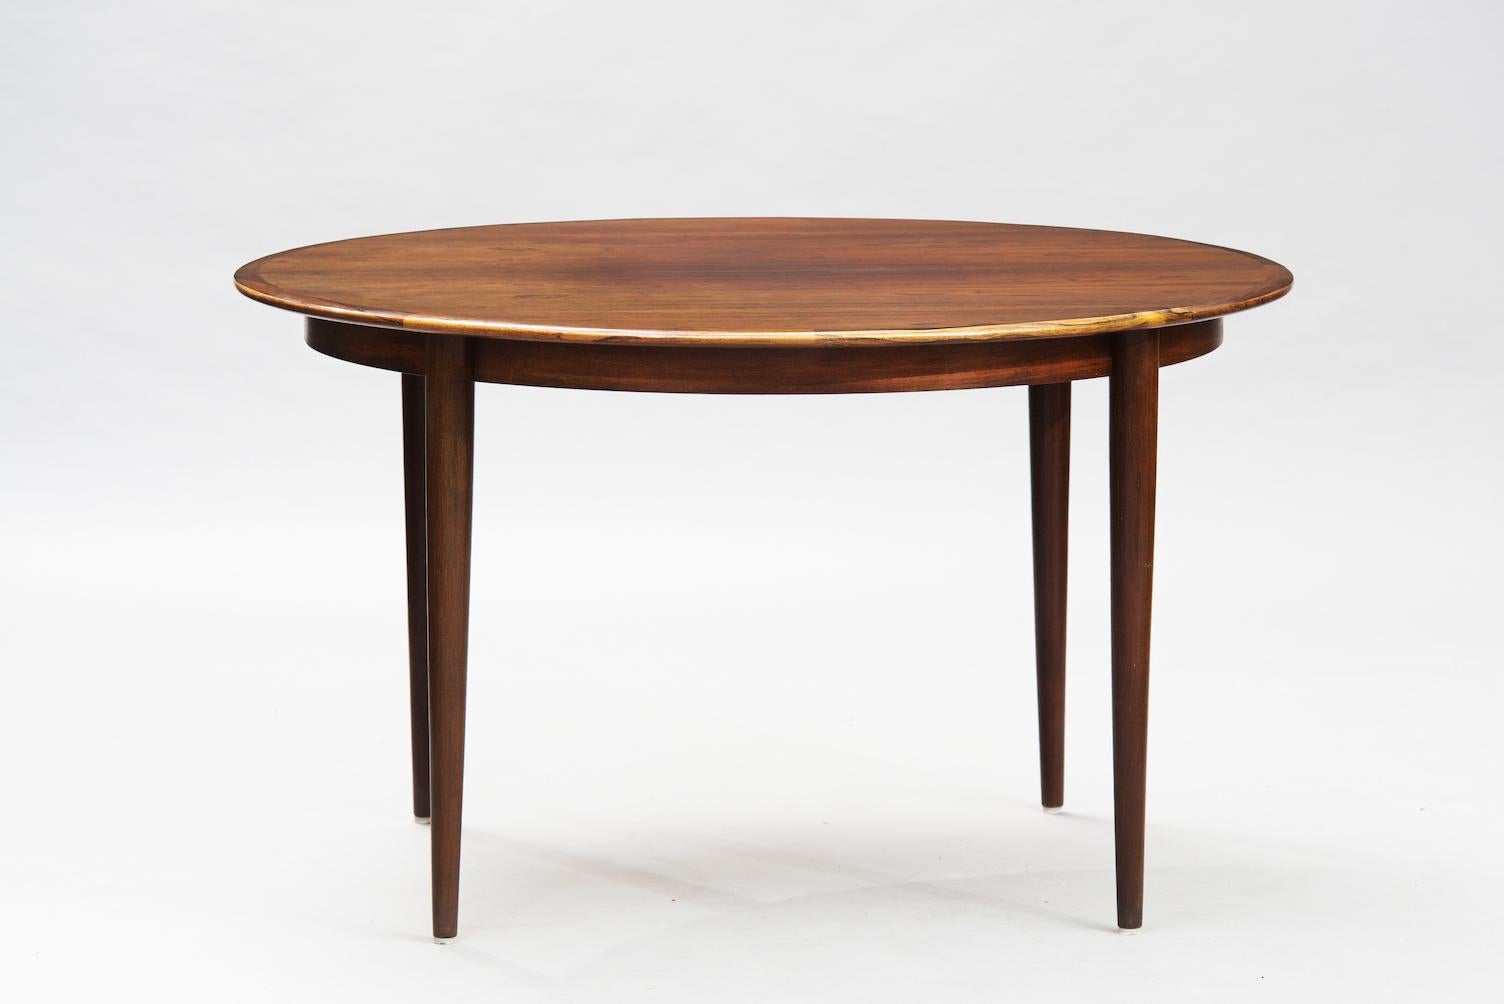 Mid-Century Modern Danish rosewood extendible dining table.
Measures: W 125/225 cm, D 125 cm, H 73 cm
This item is in original condition, can be sold as it is or fully restored, the price shown is in original condition.
 